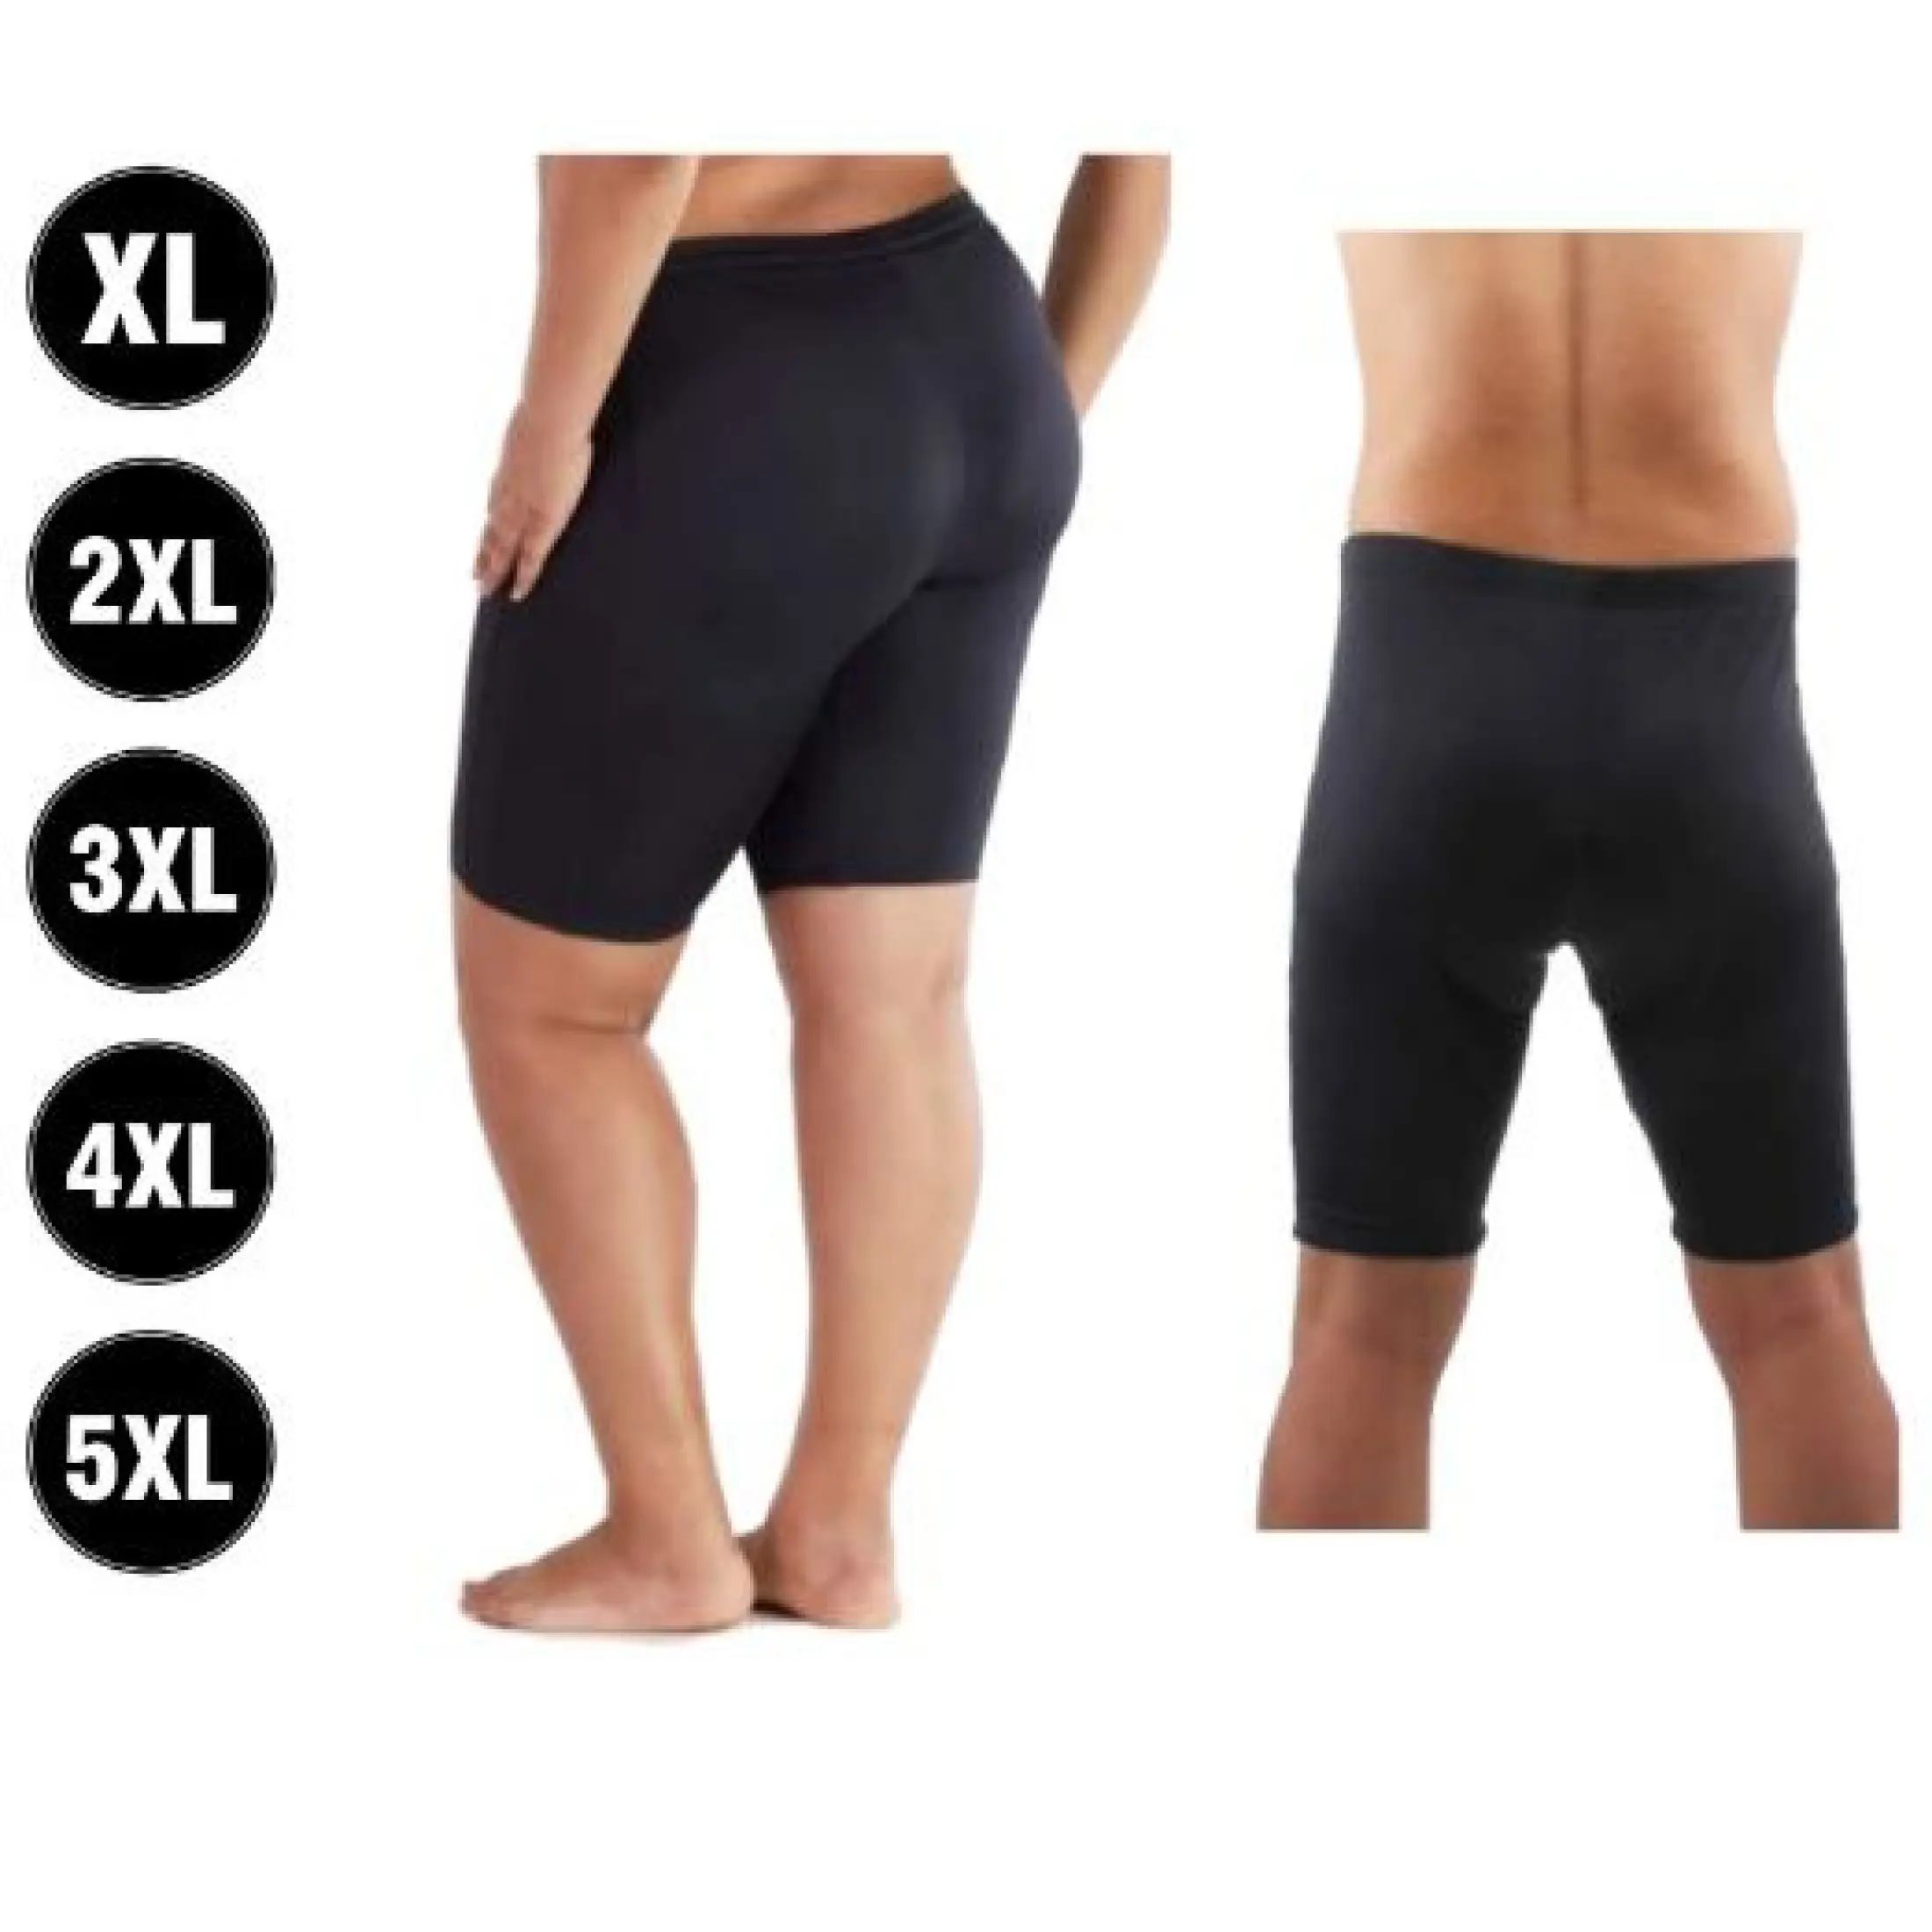 extra thick cycle shorts